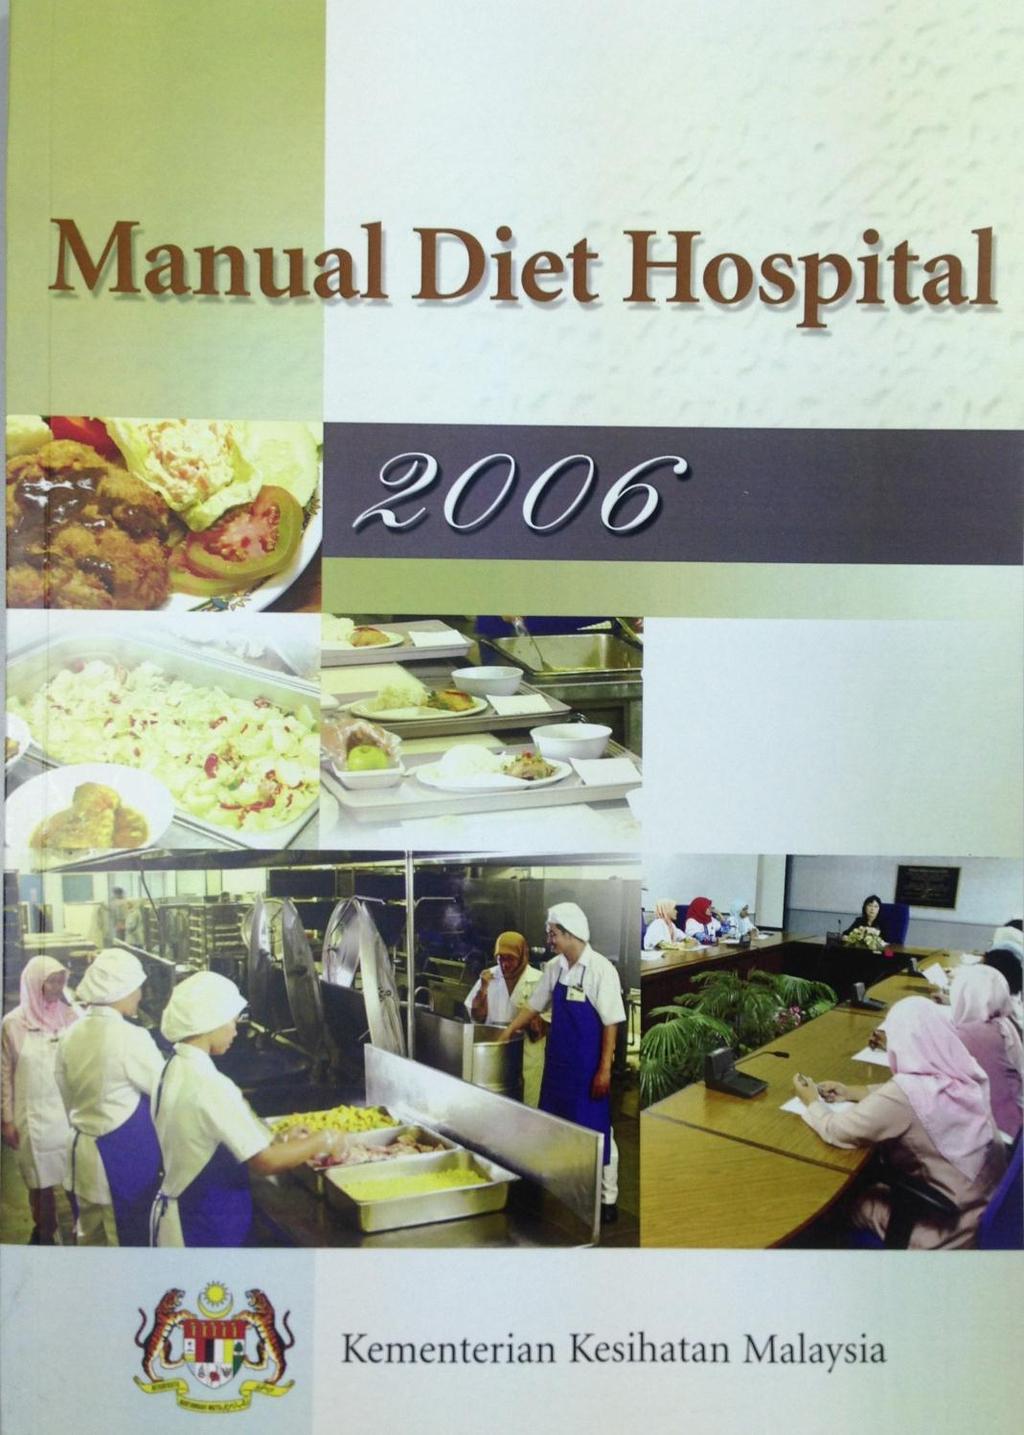 Hospital Diet Manual Manual for Foodservice operation management in the hospital setting Includes all